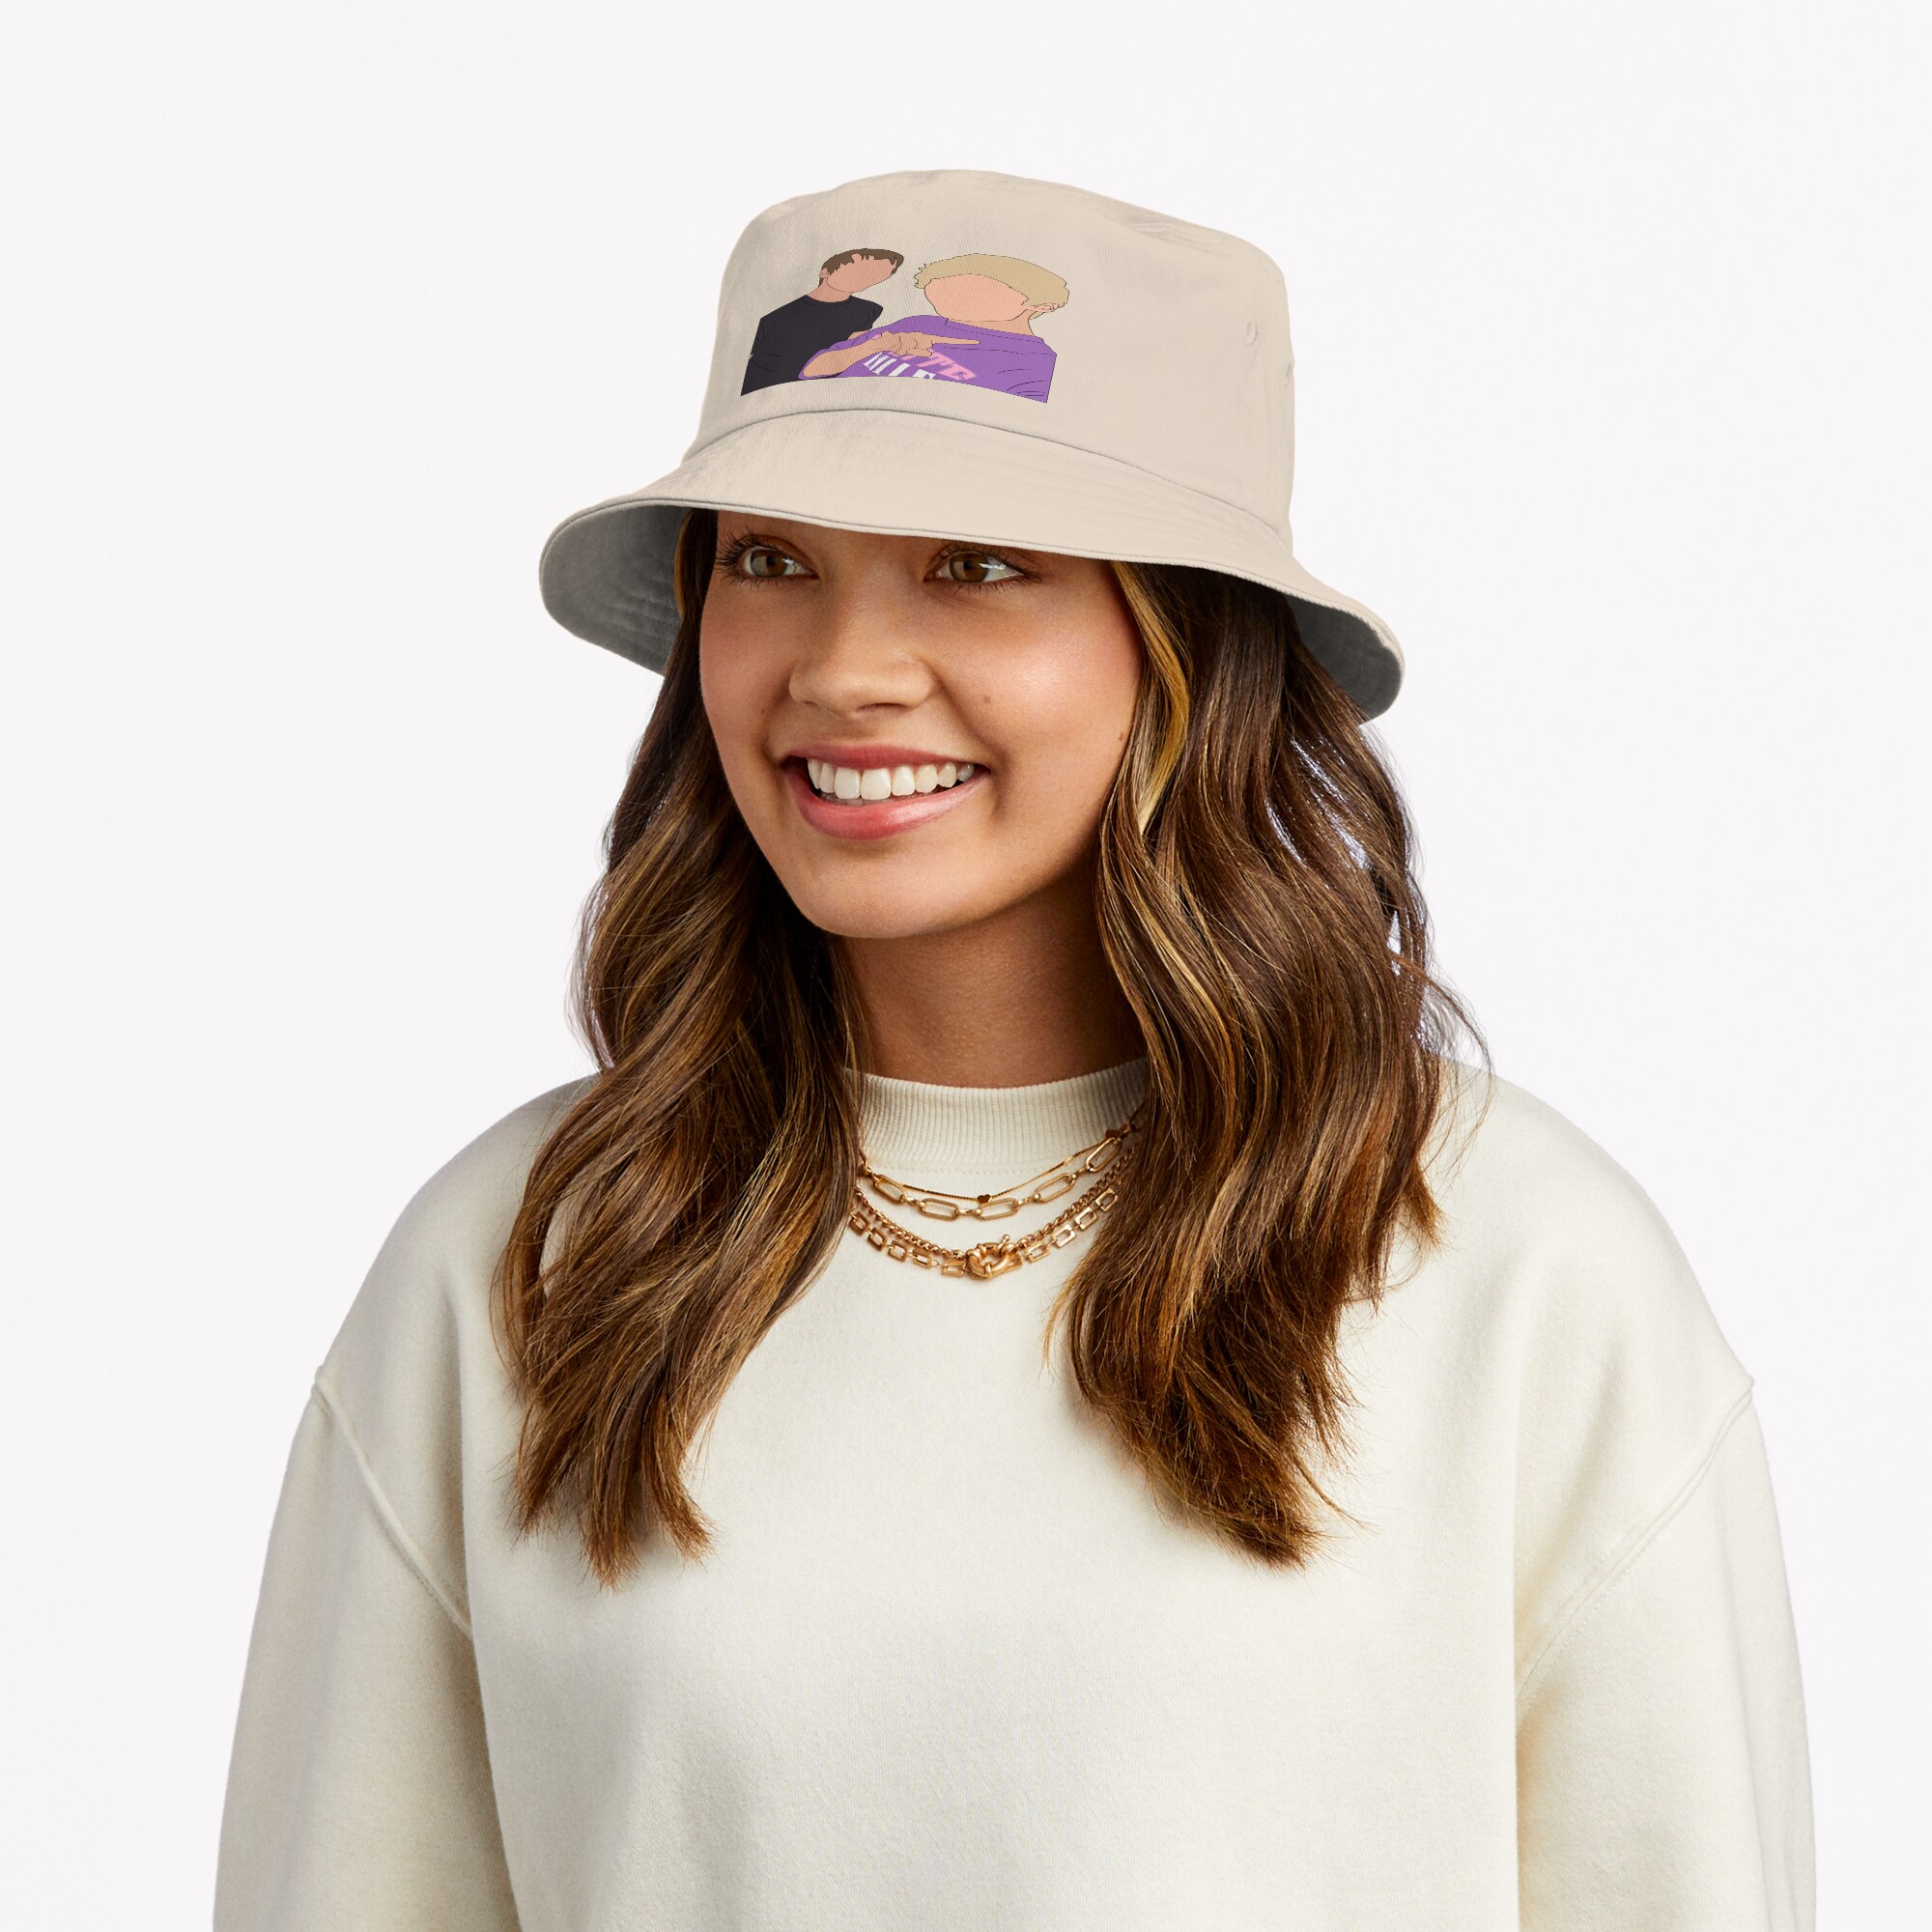 ssrcobucket hatwomense5d6c5f62bbf65eefrontsquare2000x2000 bgf8f8f8 9 - Sam And Colby Shop